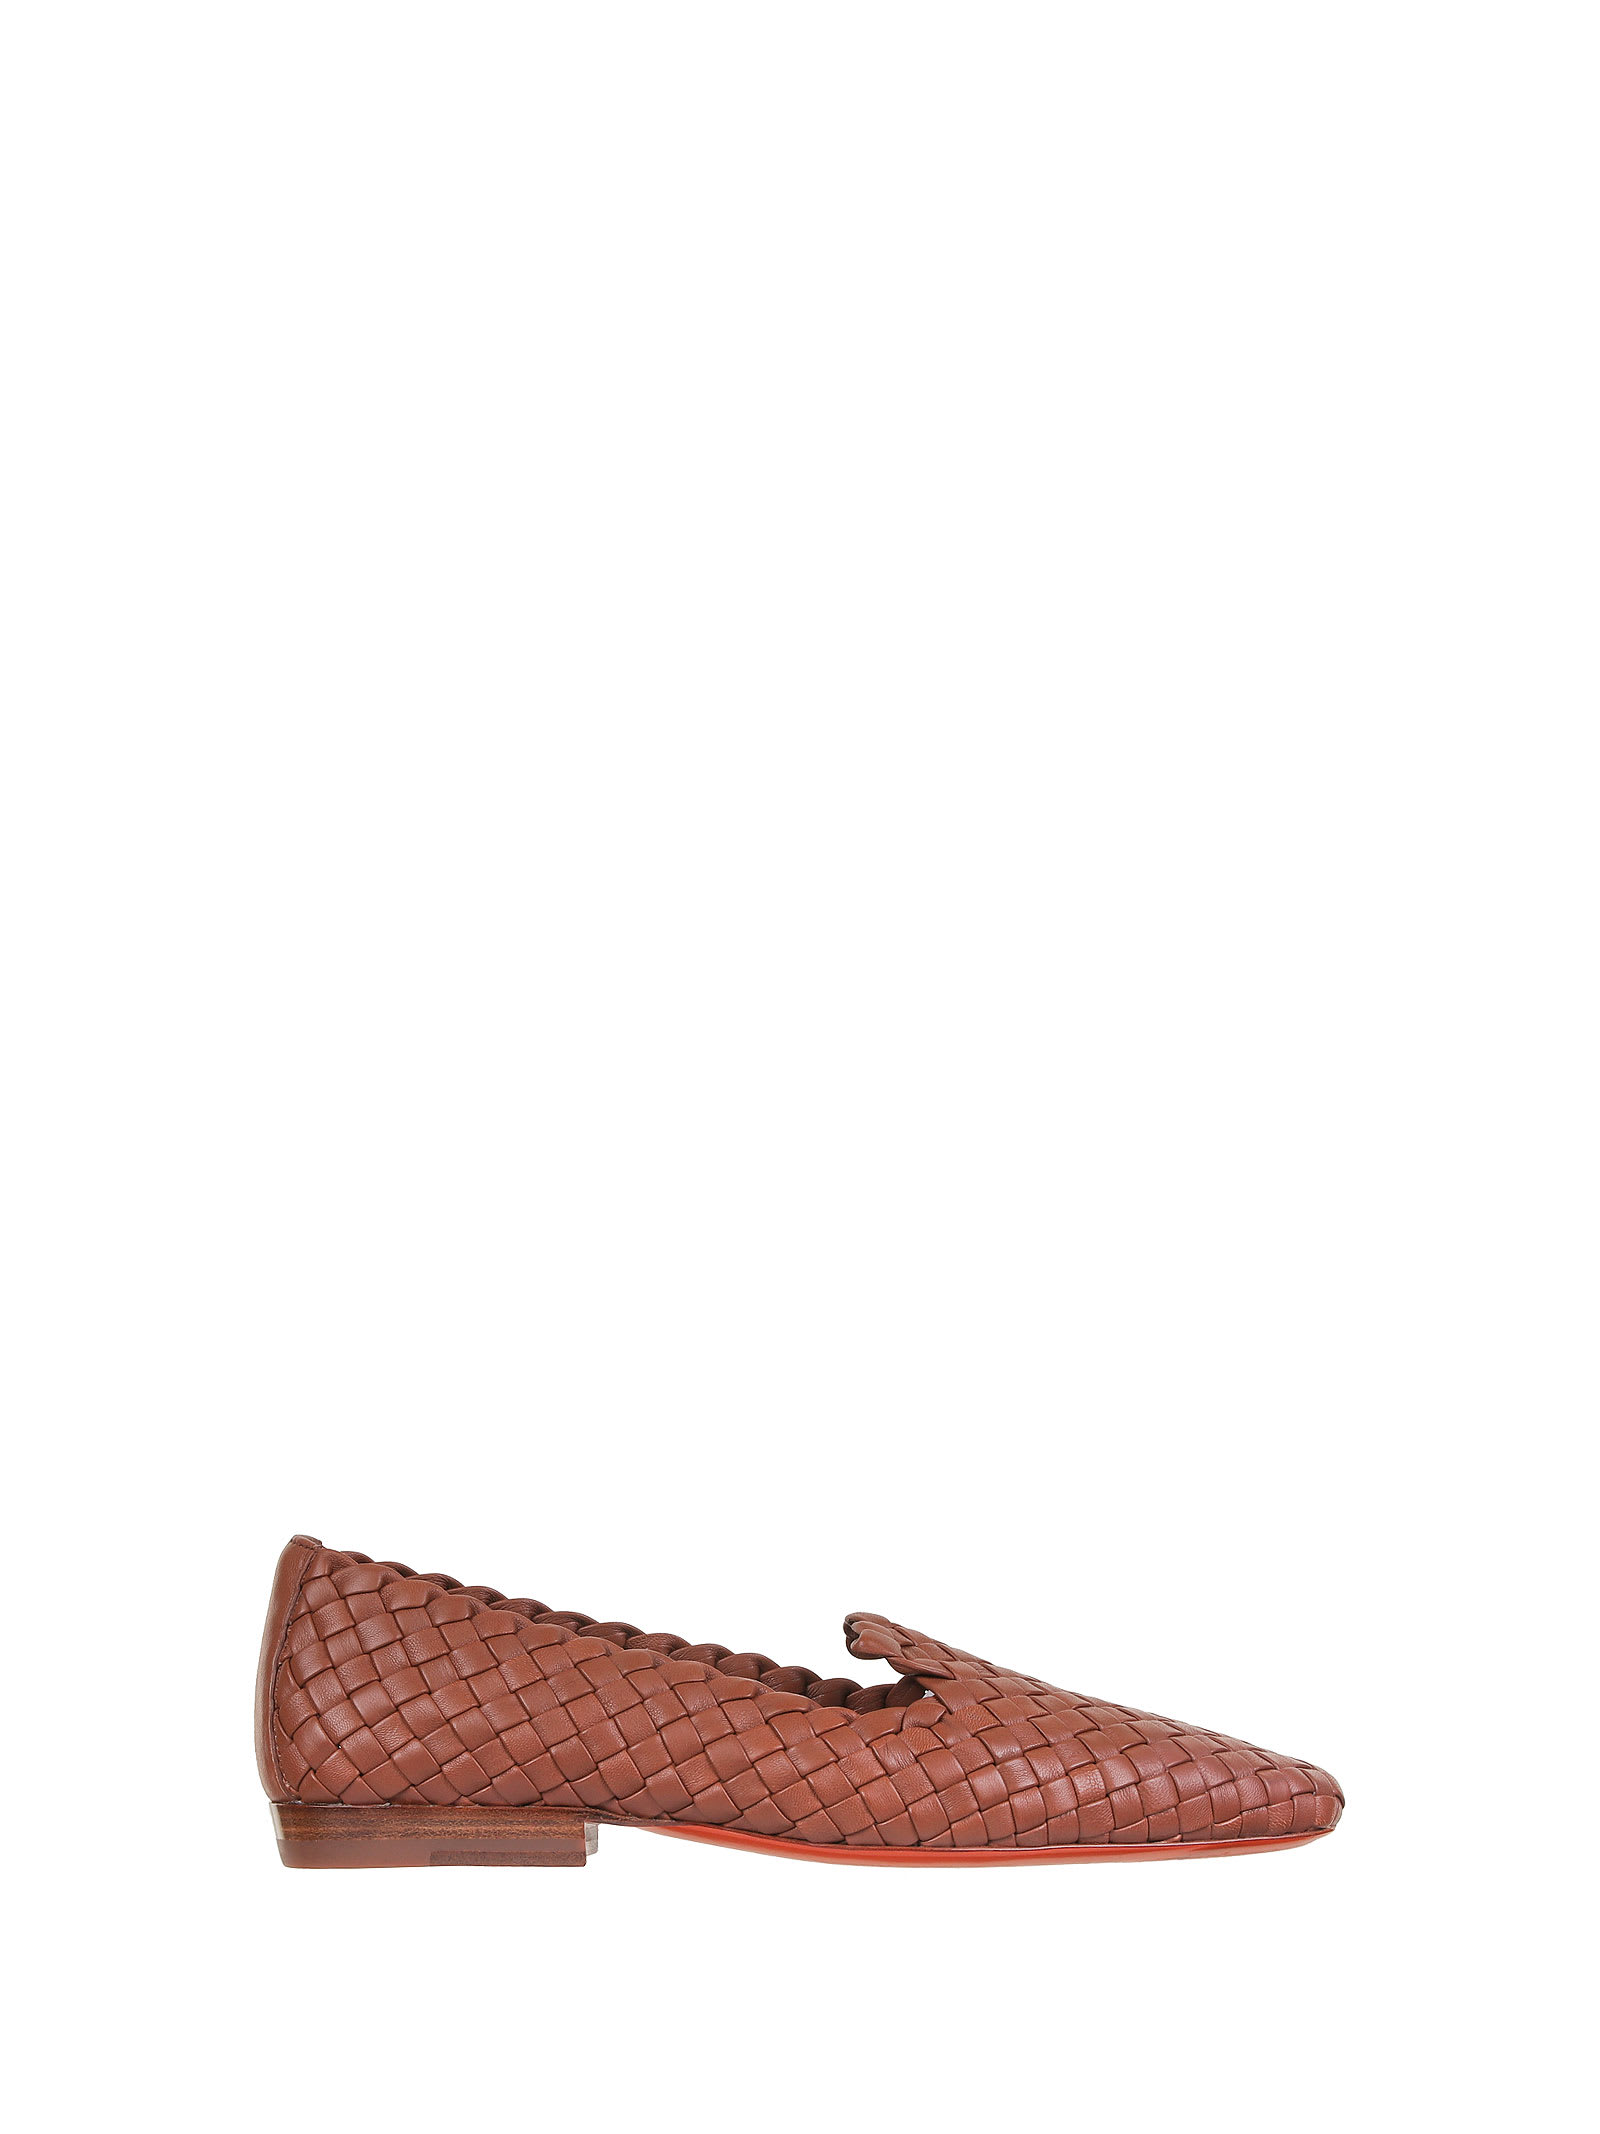 Santoni Loafer In Tan Braided Leather